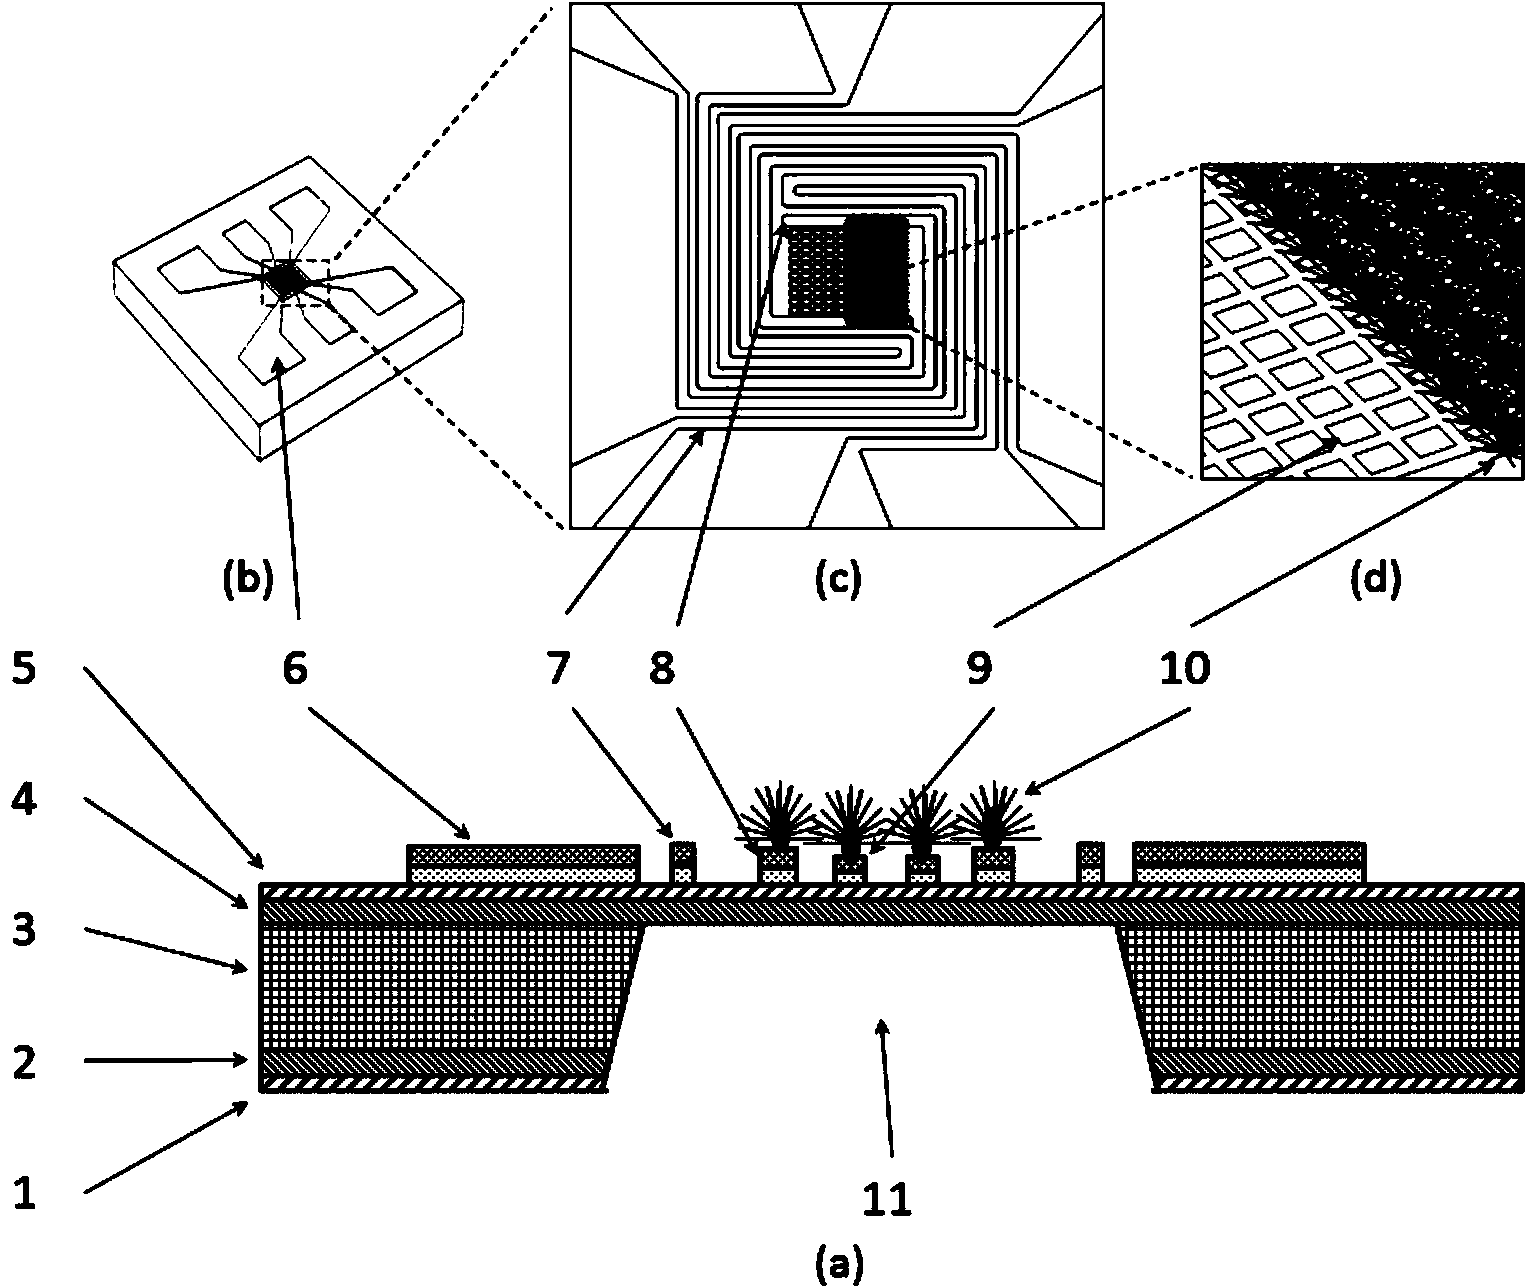 Metal-oxide gas sensor based on MEMS (Micro-Electro-Mechanic System) and preparation technology thereof